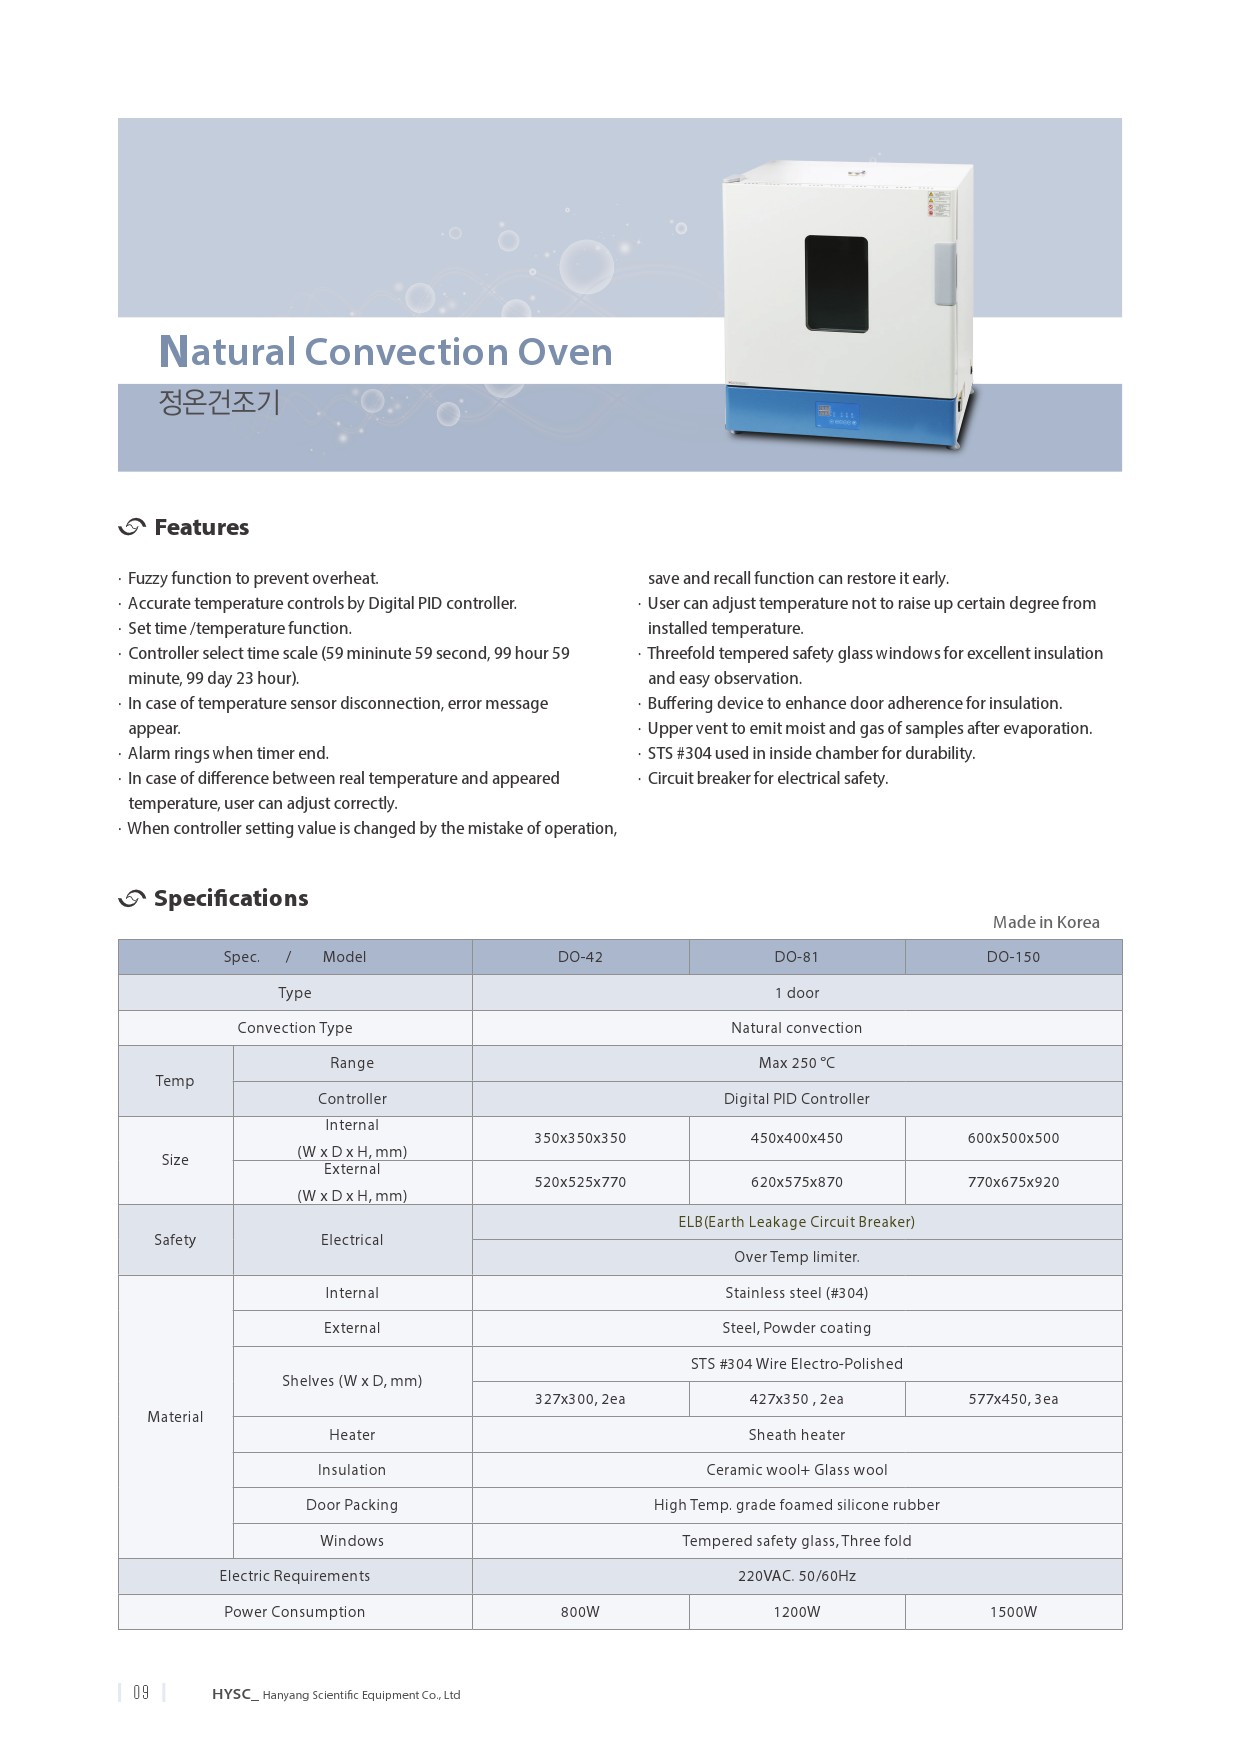 HYSC_Introduction_Natural Convection Oven-1.jpg